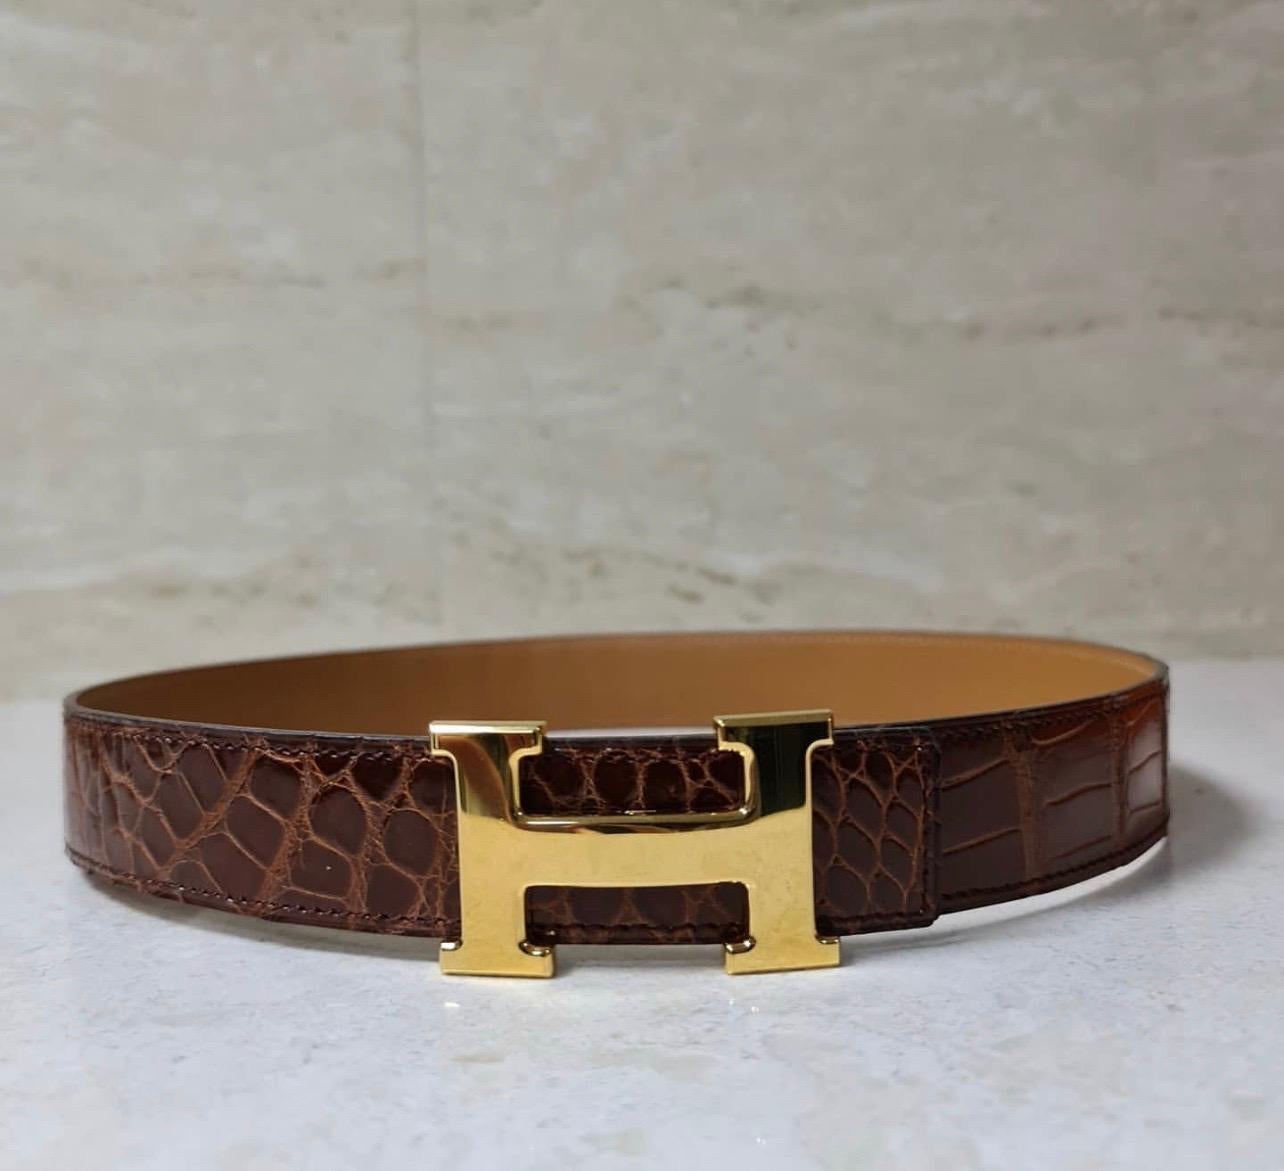 Superb Hermès belt H for women in crocodile glazed brown leather, H buckle in gold palladium metal. 
Smooth leather inside.
Width 3 cm; Buckle: 6 cm x 3.5 cm
Comes in original Hermes box.
Condition is very good but has some scraches on buckle.

For